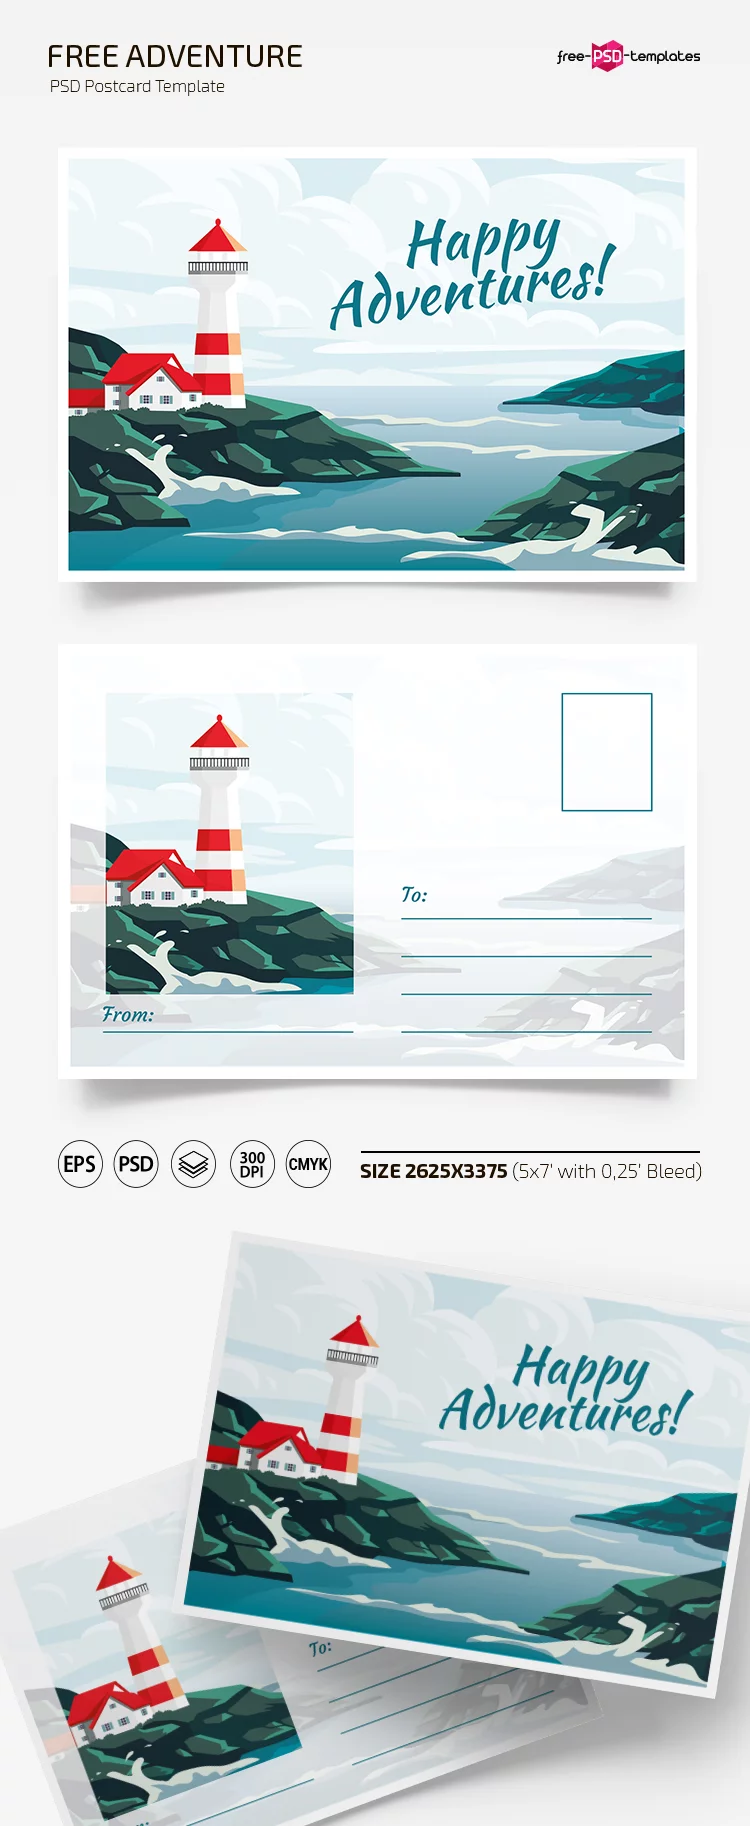 Free Adventures Postcard Templates in PSD + EPS